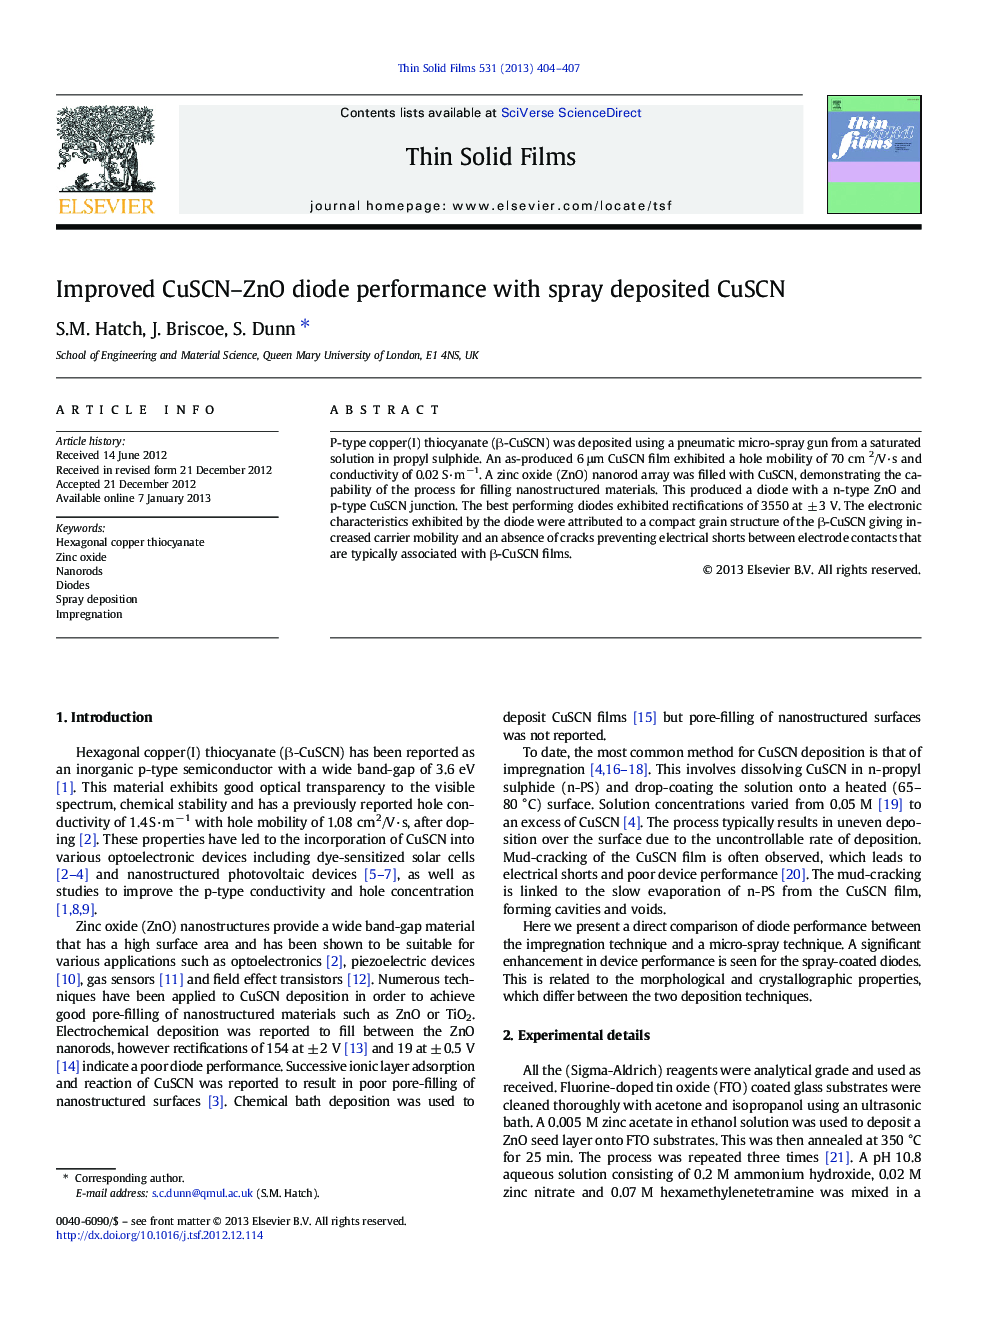 Improved CuSCN-ZnO diode performance with spray deposited CuSCN